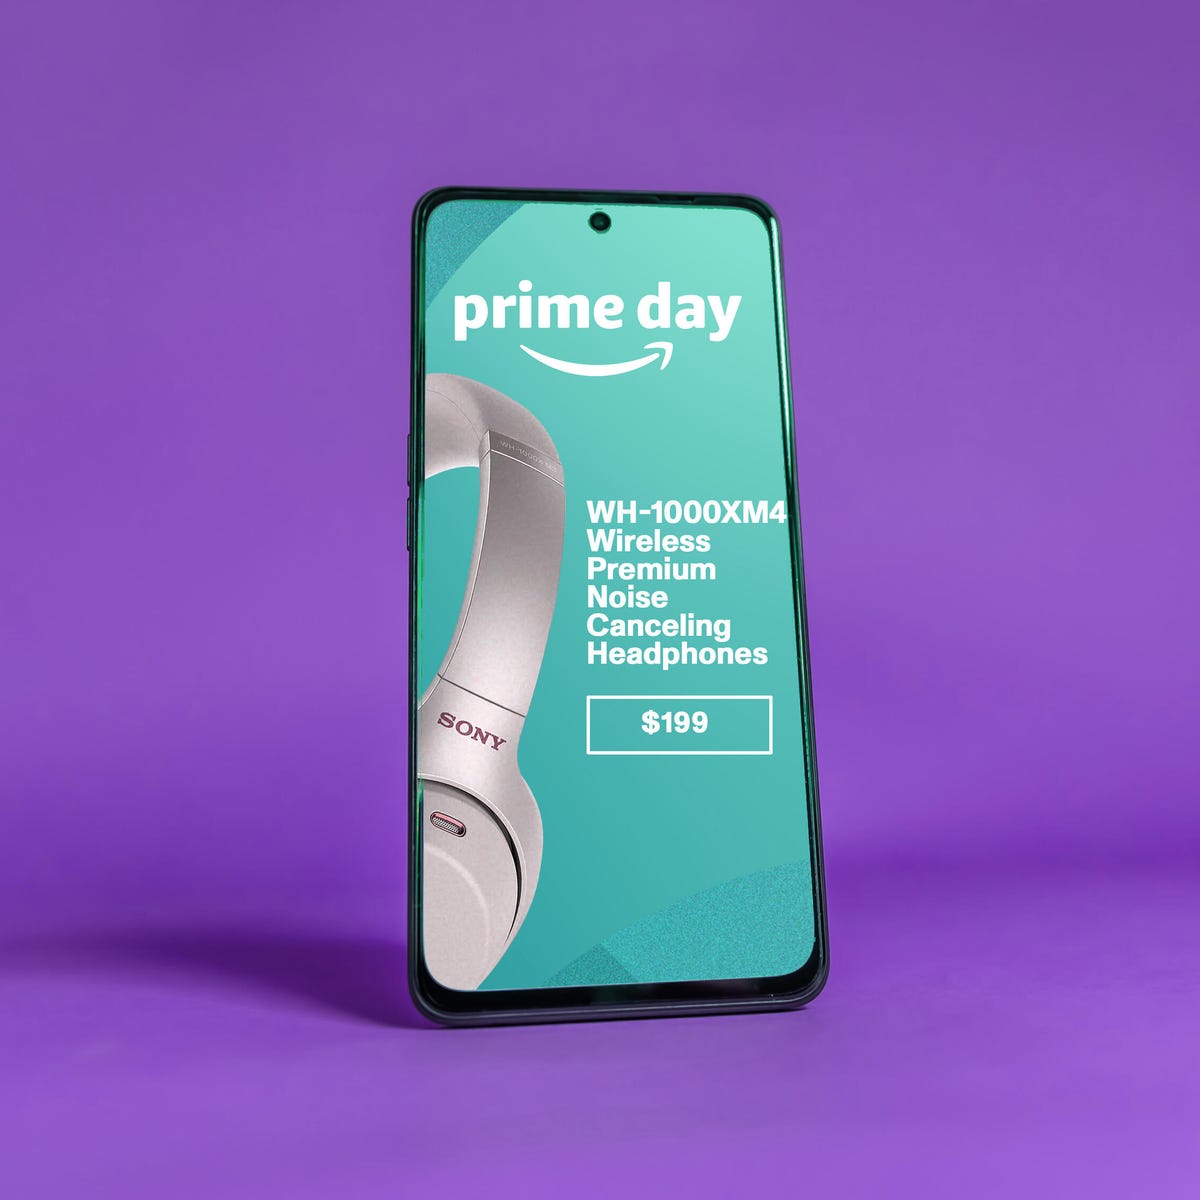 Check Out the Best Prime Day Deals Still Available - CNET